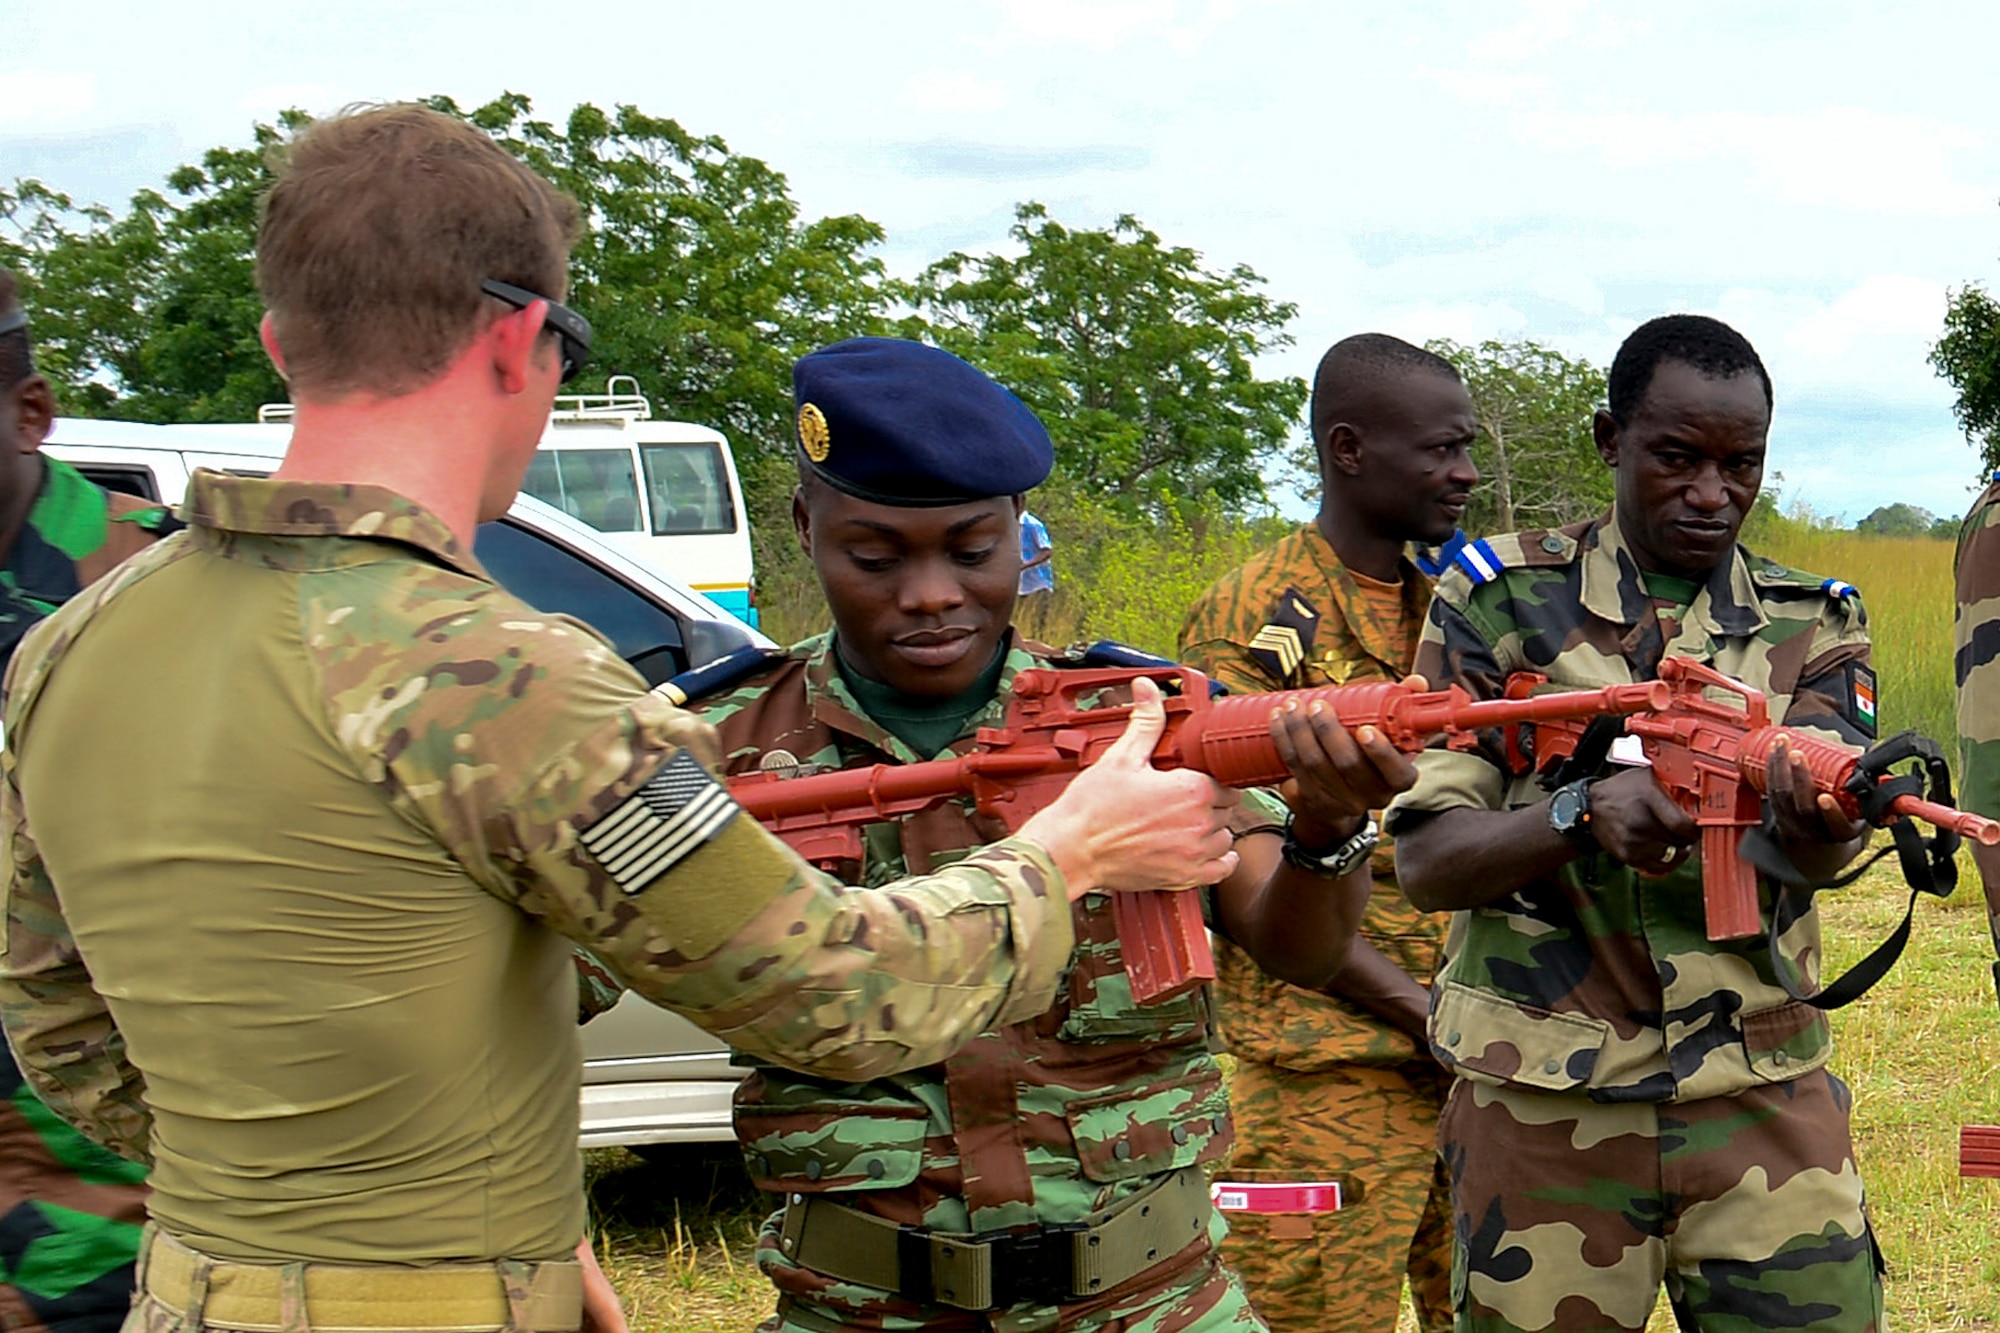 U.S. Air Force Staff Sgt. Jake Van Dyke (left), 435th Security Forces Squadron contingency response fire team member, helps a Benin airman with his weapon during the African Partnership Flight in Accra, Ghana, Sept. 14, 2016. APF is a transparent working environment between U.S. and African partner nations that builds trust and cooperation to achieve common solutions. (U.S. Air Force photo by Staff Sgt. Stephanie Longoria)